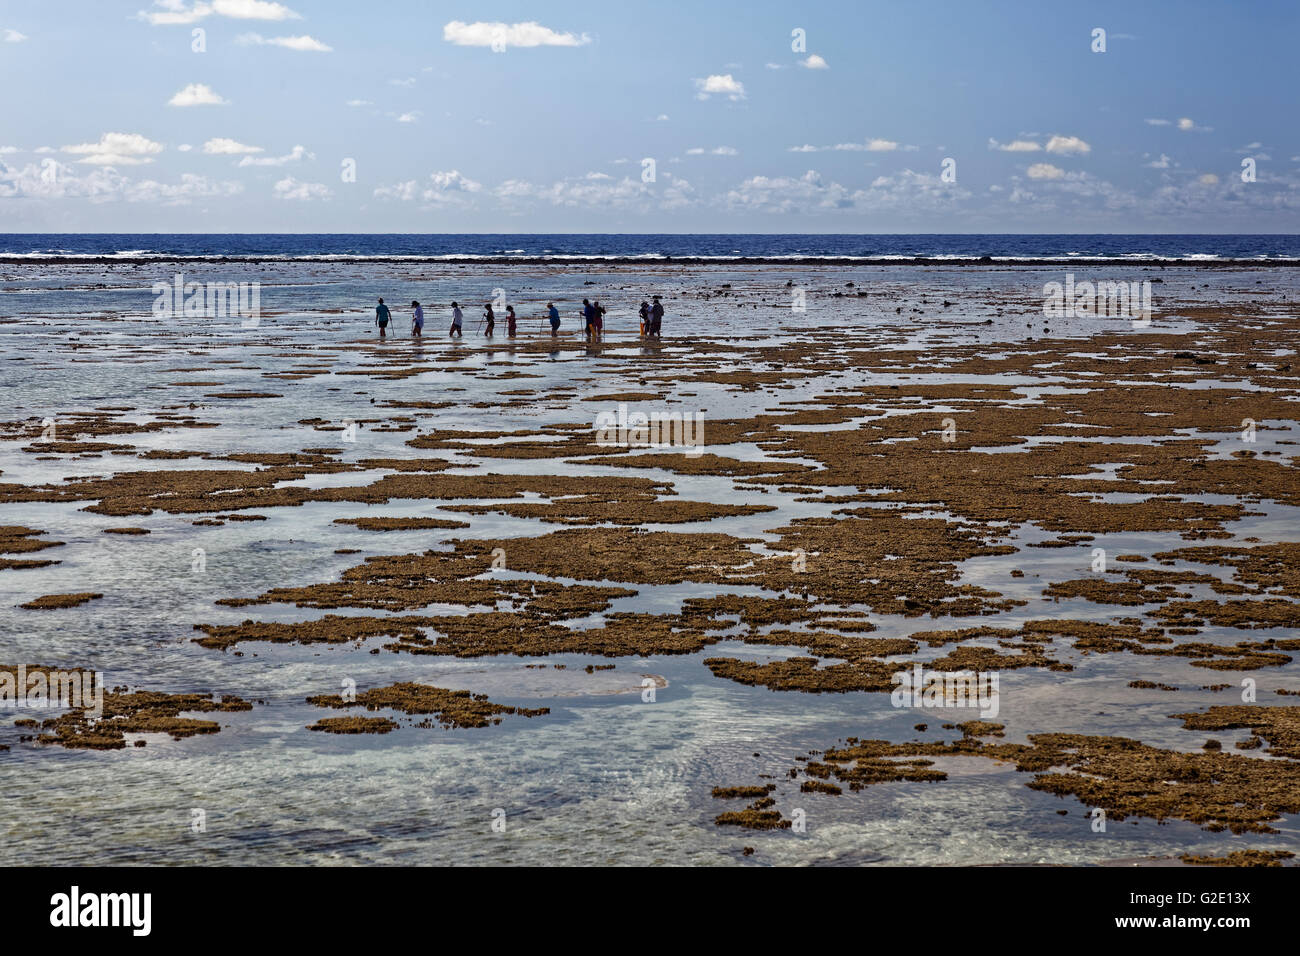 Tourists observe animals in rockpools, at low tide on reef top, Lady Elliot Island, Queensland, Pacific, Australia Stock Photo